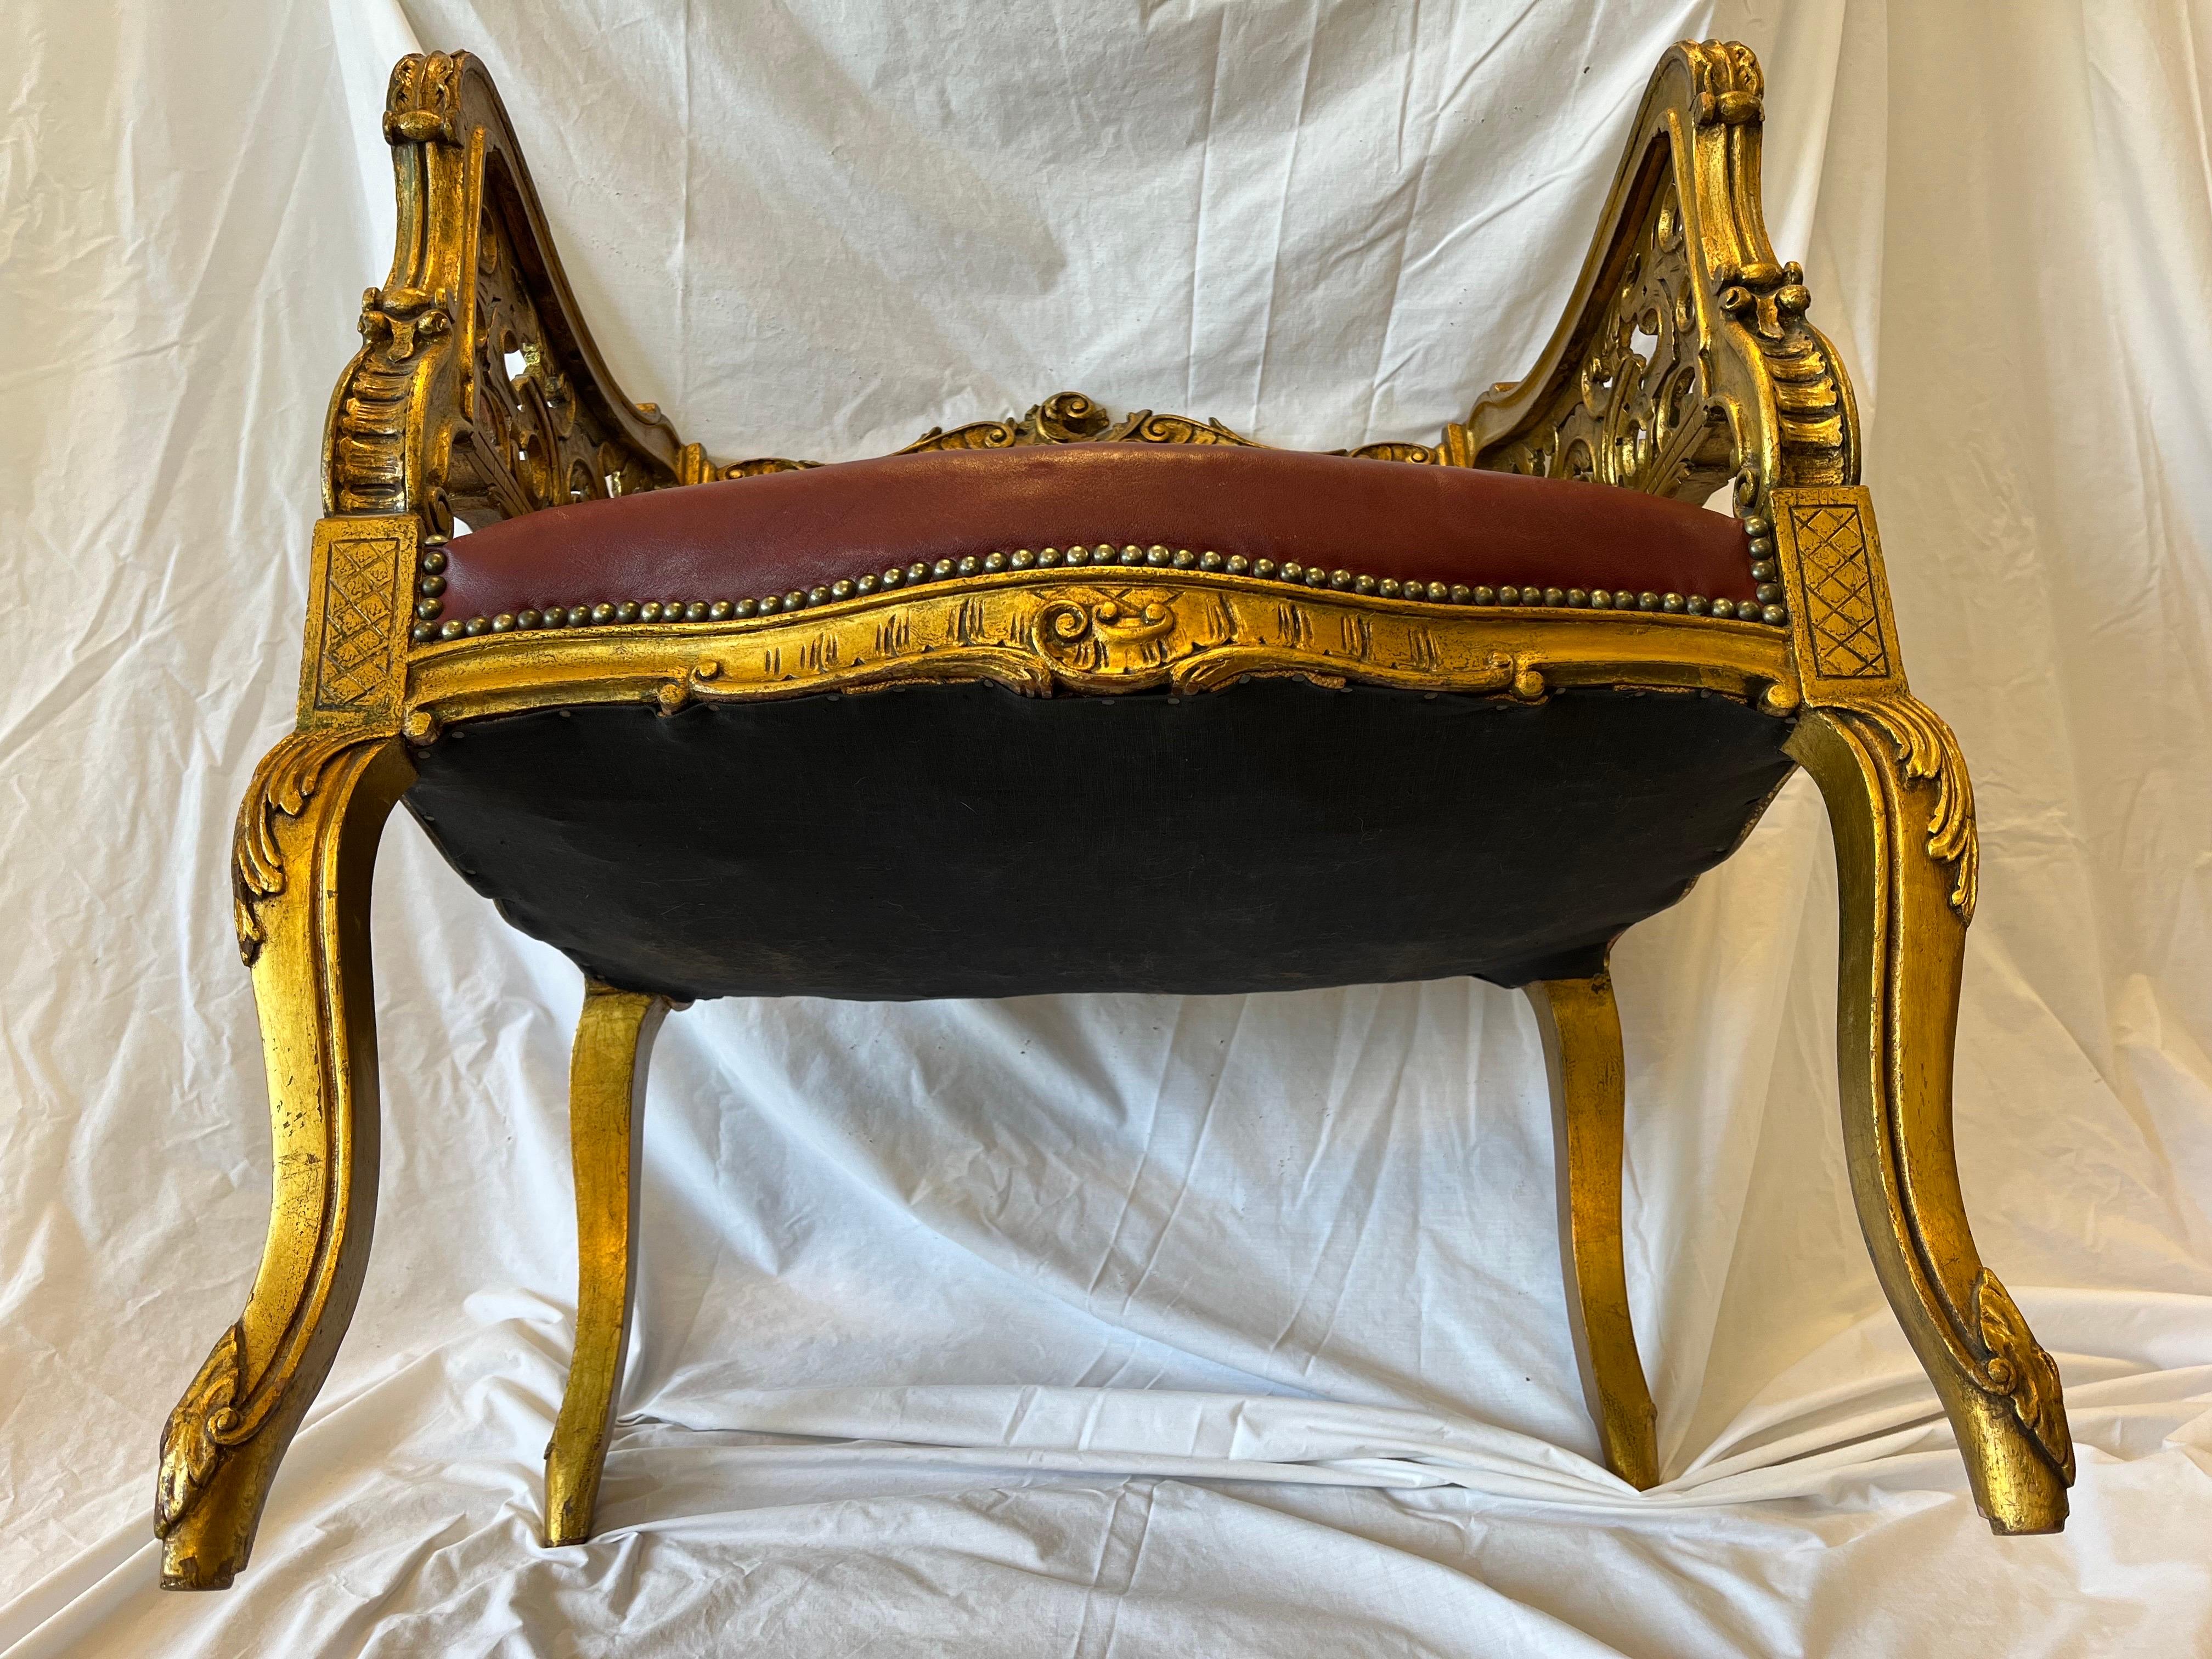 Antique Carved and Gilt Wood Arm Chair Bench Ornate Design Red Upholstered Seat For Sale 13